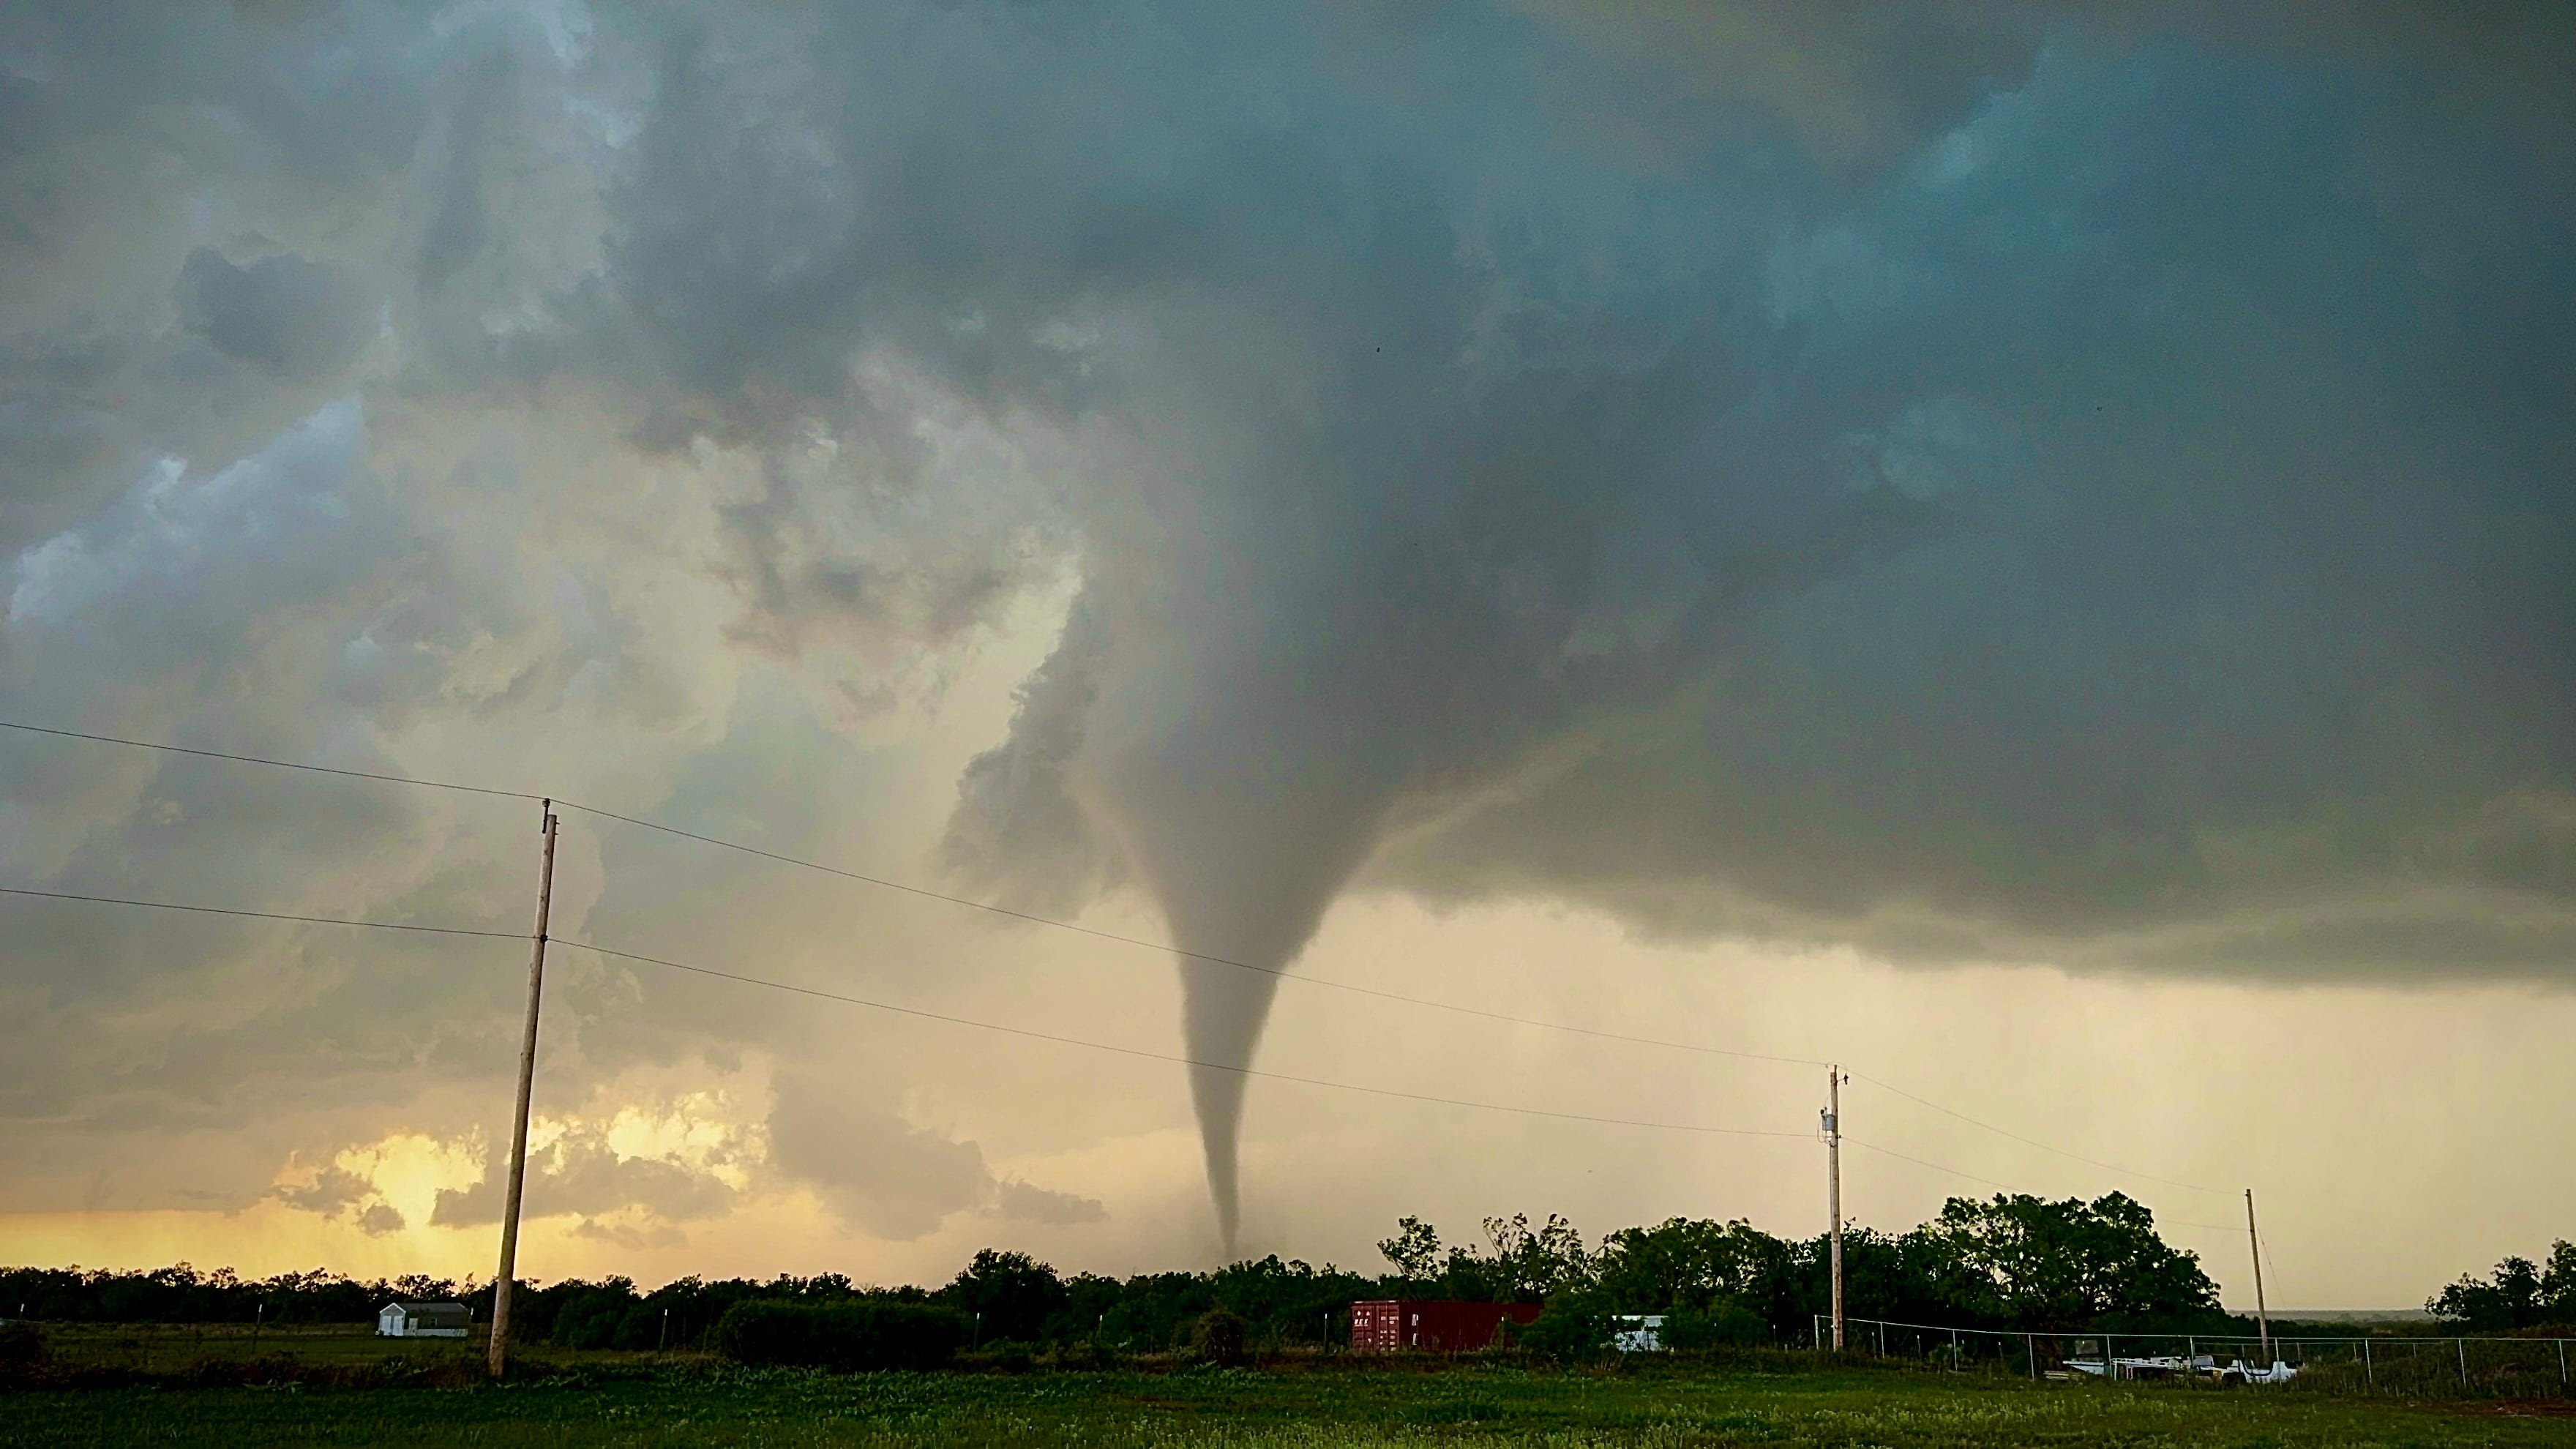 Tourists flock to Tornado Alley, paying big bucks for the chance to see dangerous storms